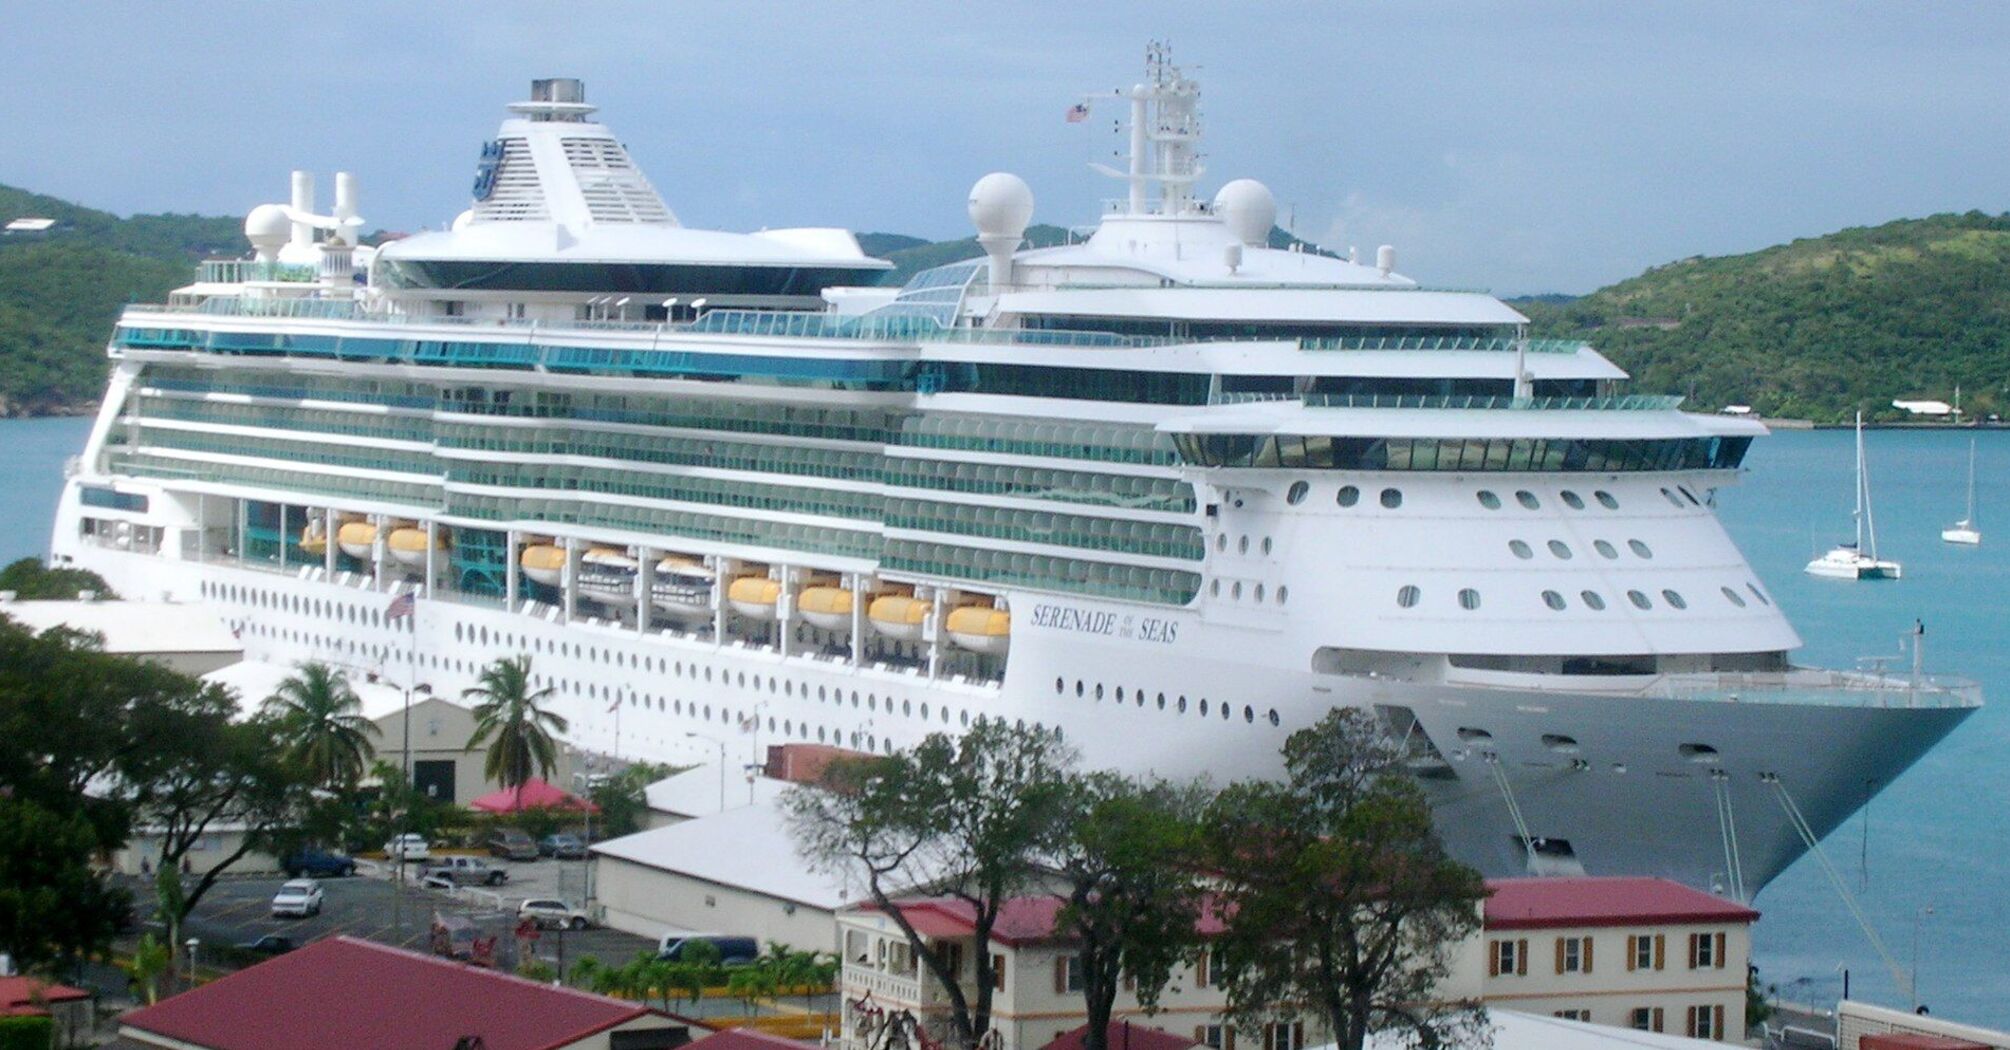 Tragedy on a world cruise: a passenger died during a tour on the Serenade of the Seas